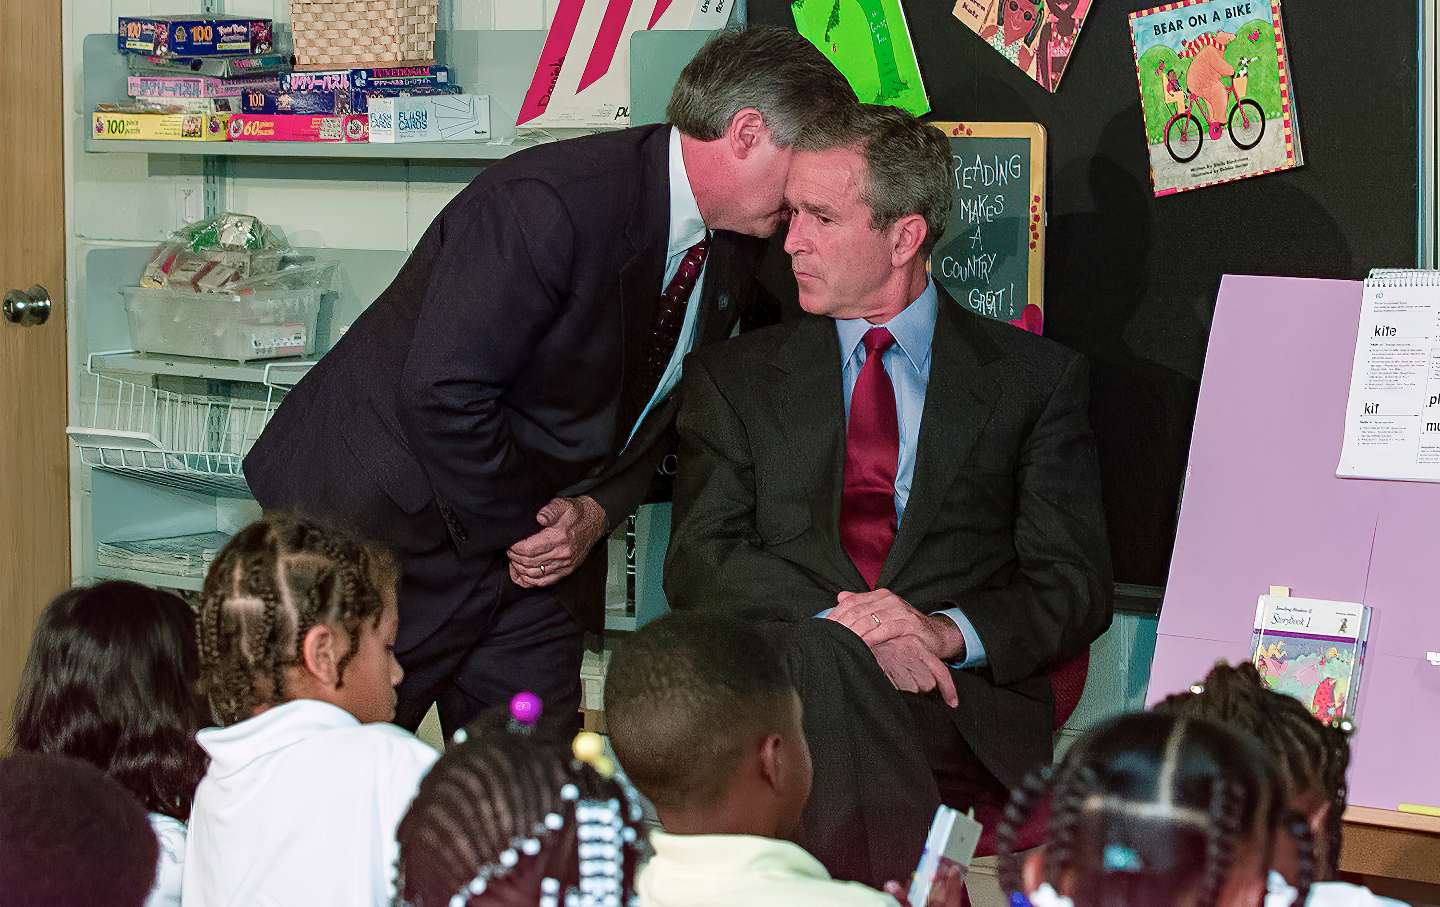 White House chief of staff Andrew Card whispers to President George W. Bush news that two planes have crashed into the World Trade Center, on September 11, 2001.